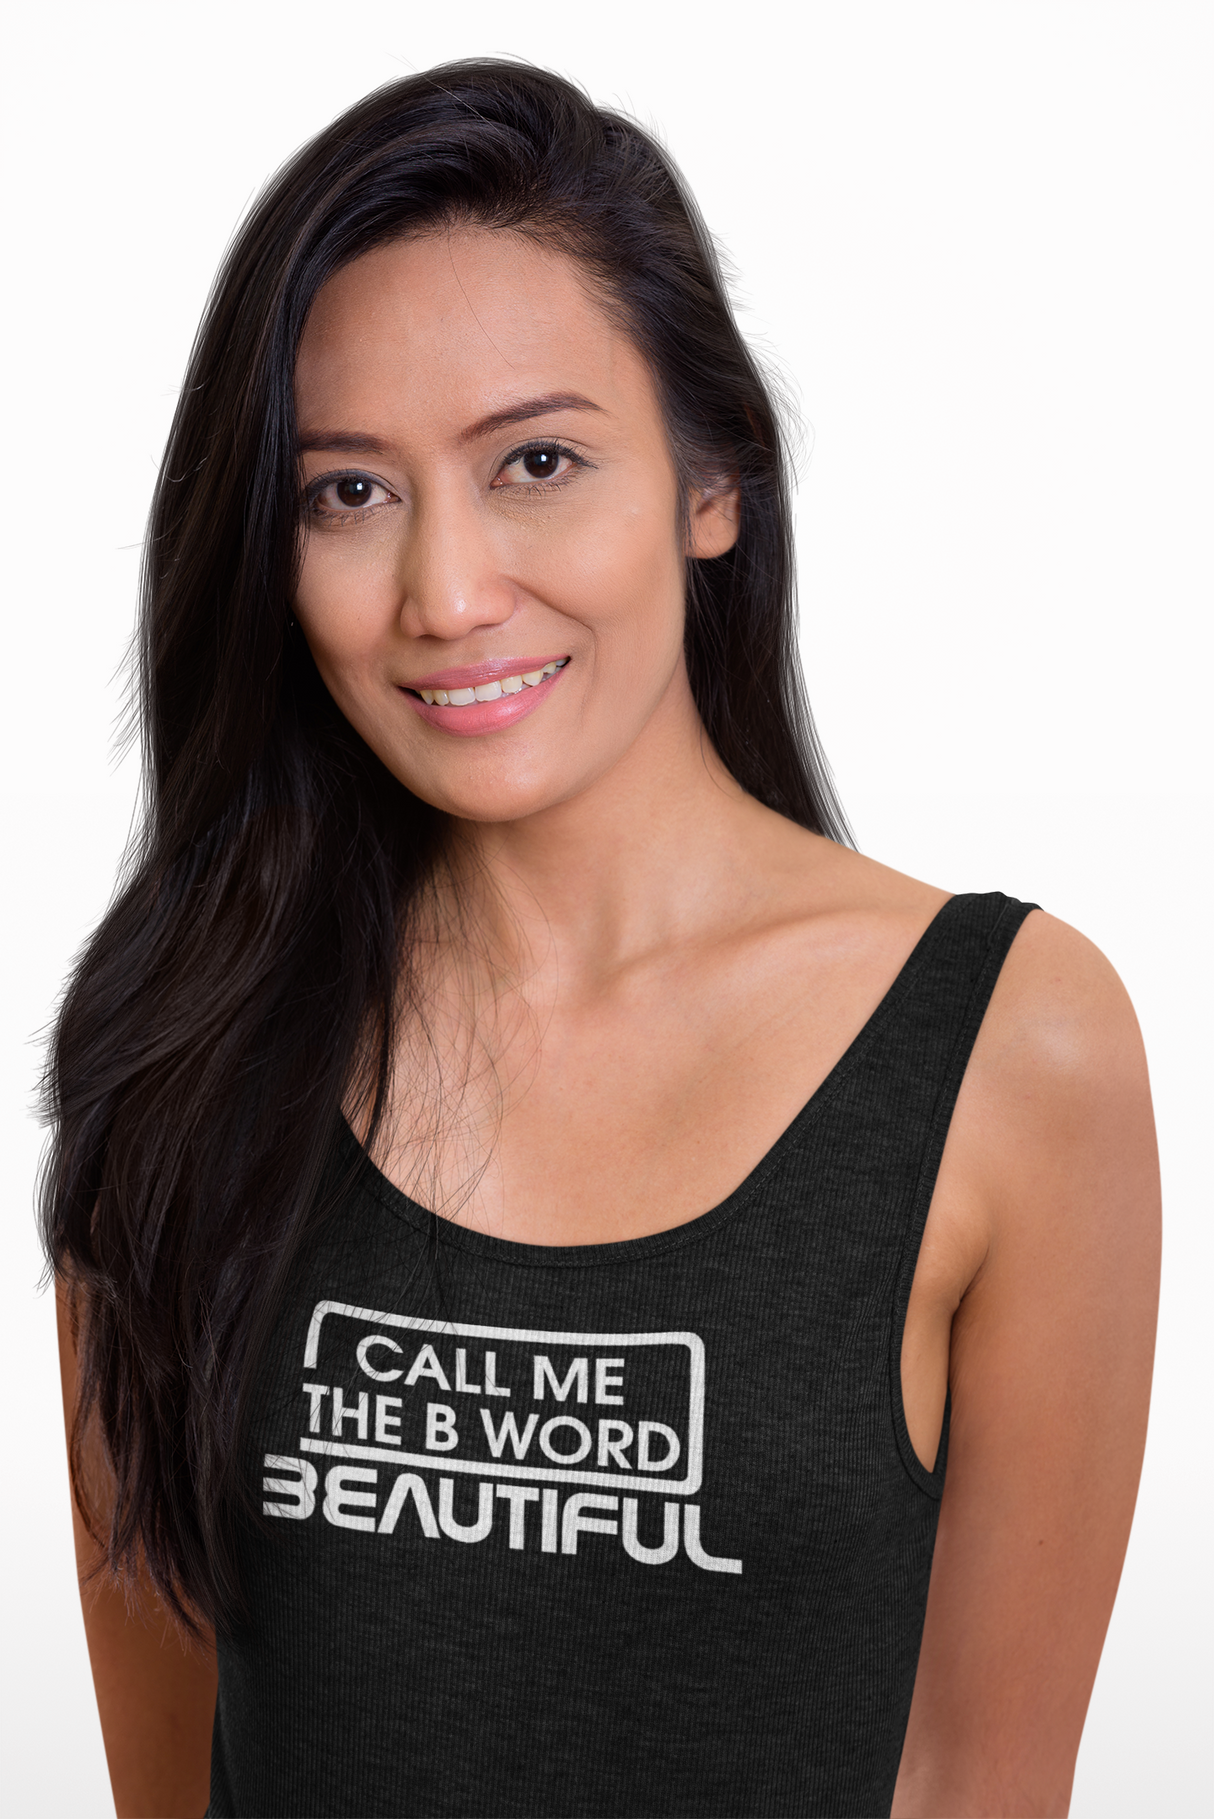 Call Me The B Word Beautiful, Racer Back, Organic Cotton, Active Loose Vest Top, White Centre Logo